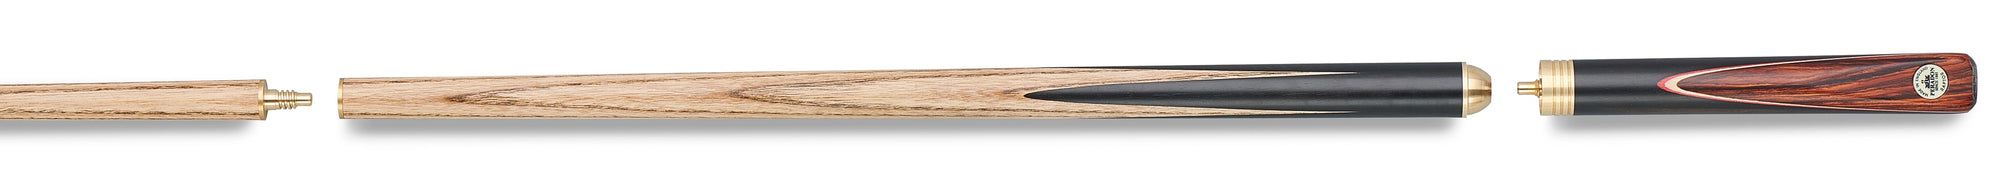 Peradon Raptor Three Section 8 Ball Pool Cue. Seperated view